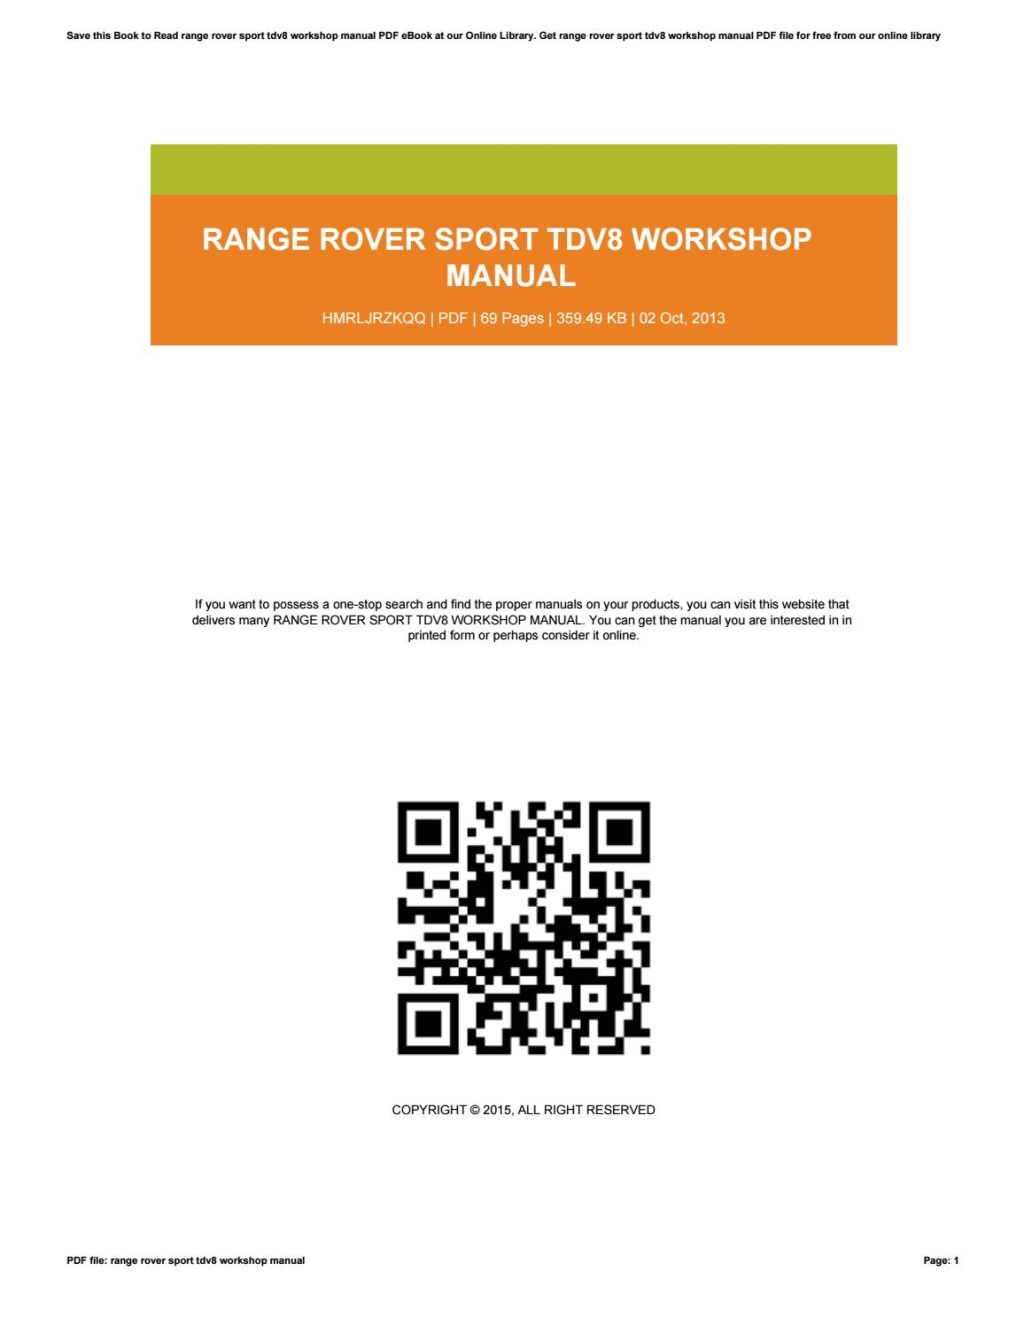 Picture of: Range rover sport tdv workshop manual by e27 – Issuu